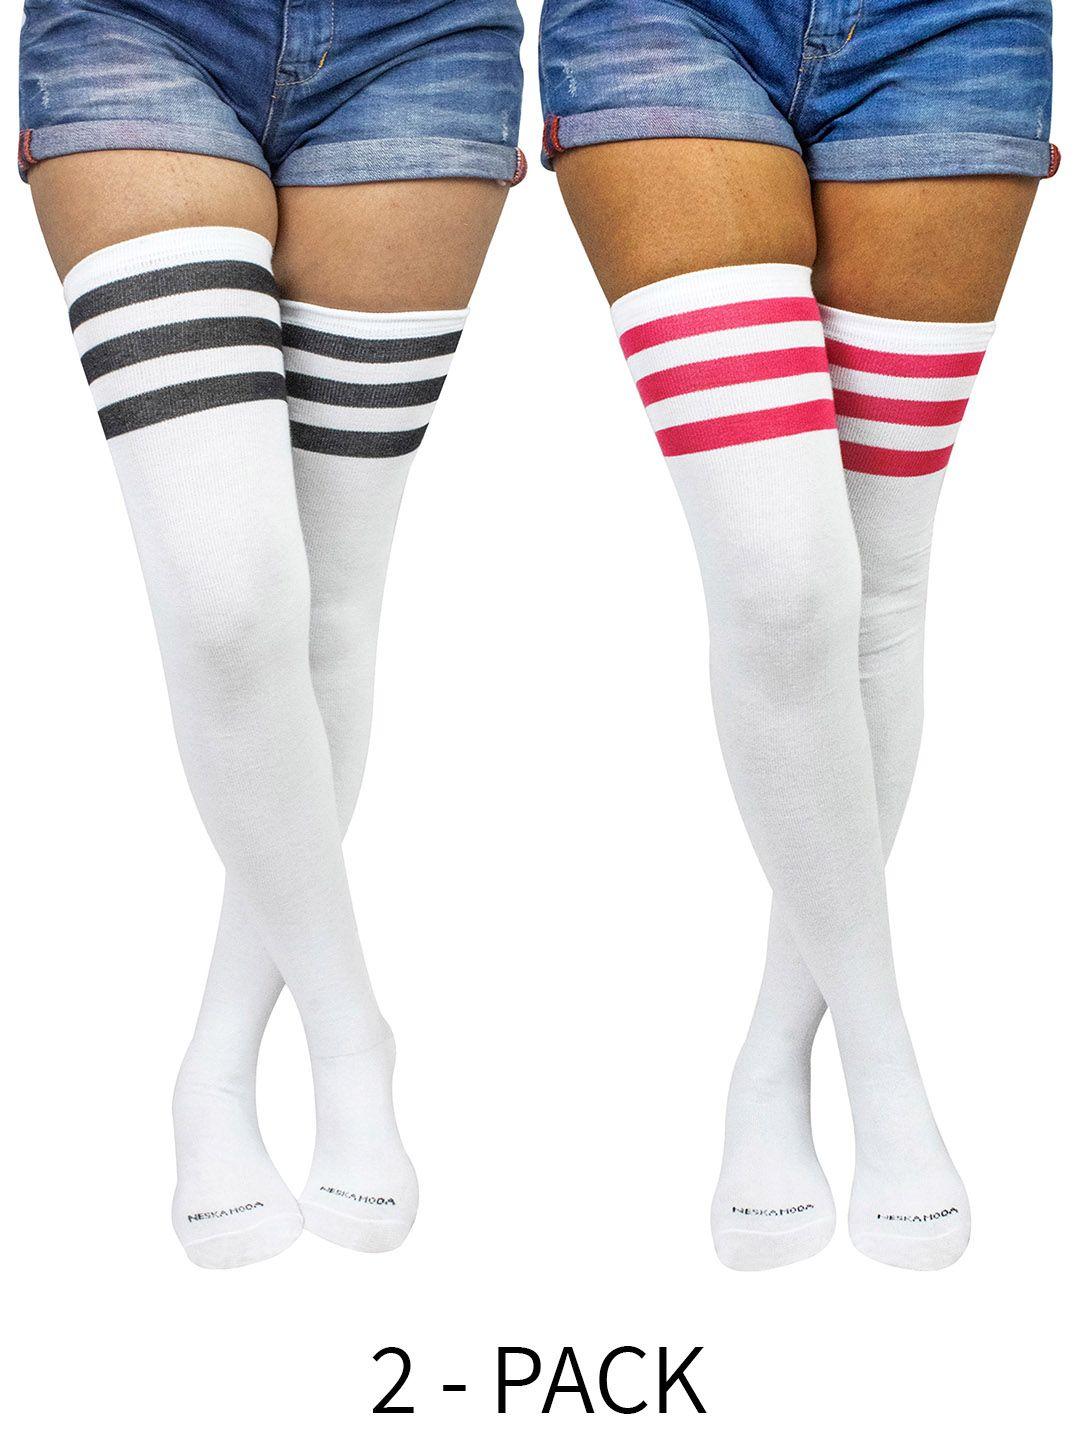 baesd pack of 2 cotton striped thigh-high stretchable stockings